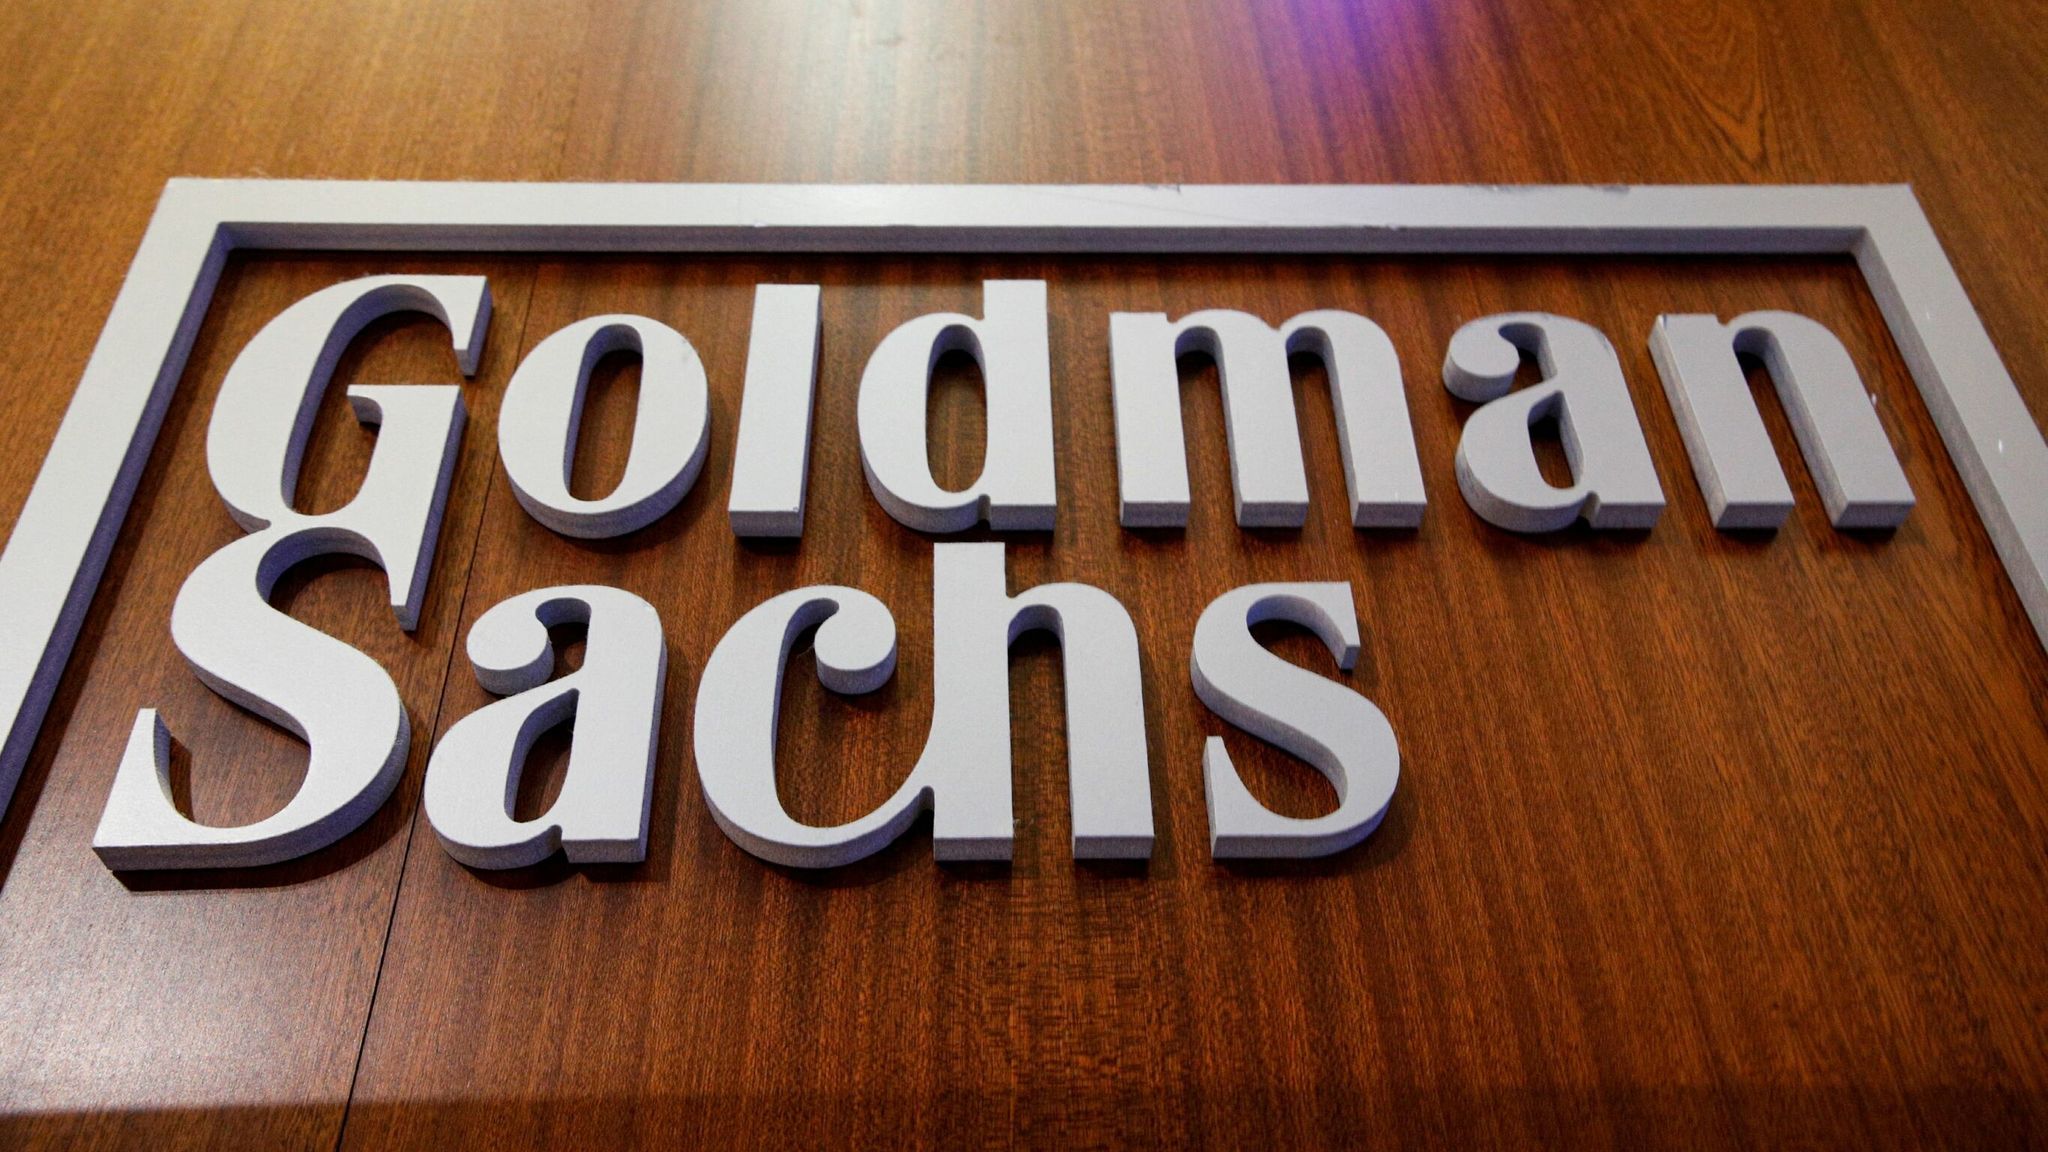 From playing against TI champions to Goldman Sachs to a job at ONE